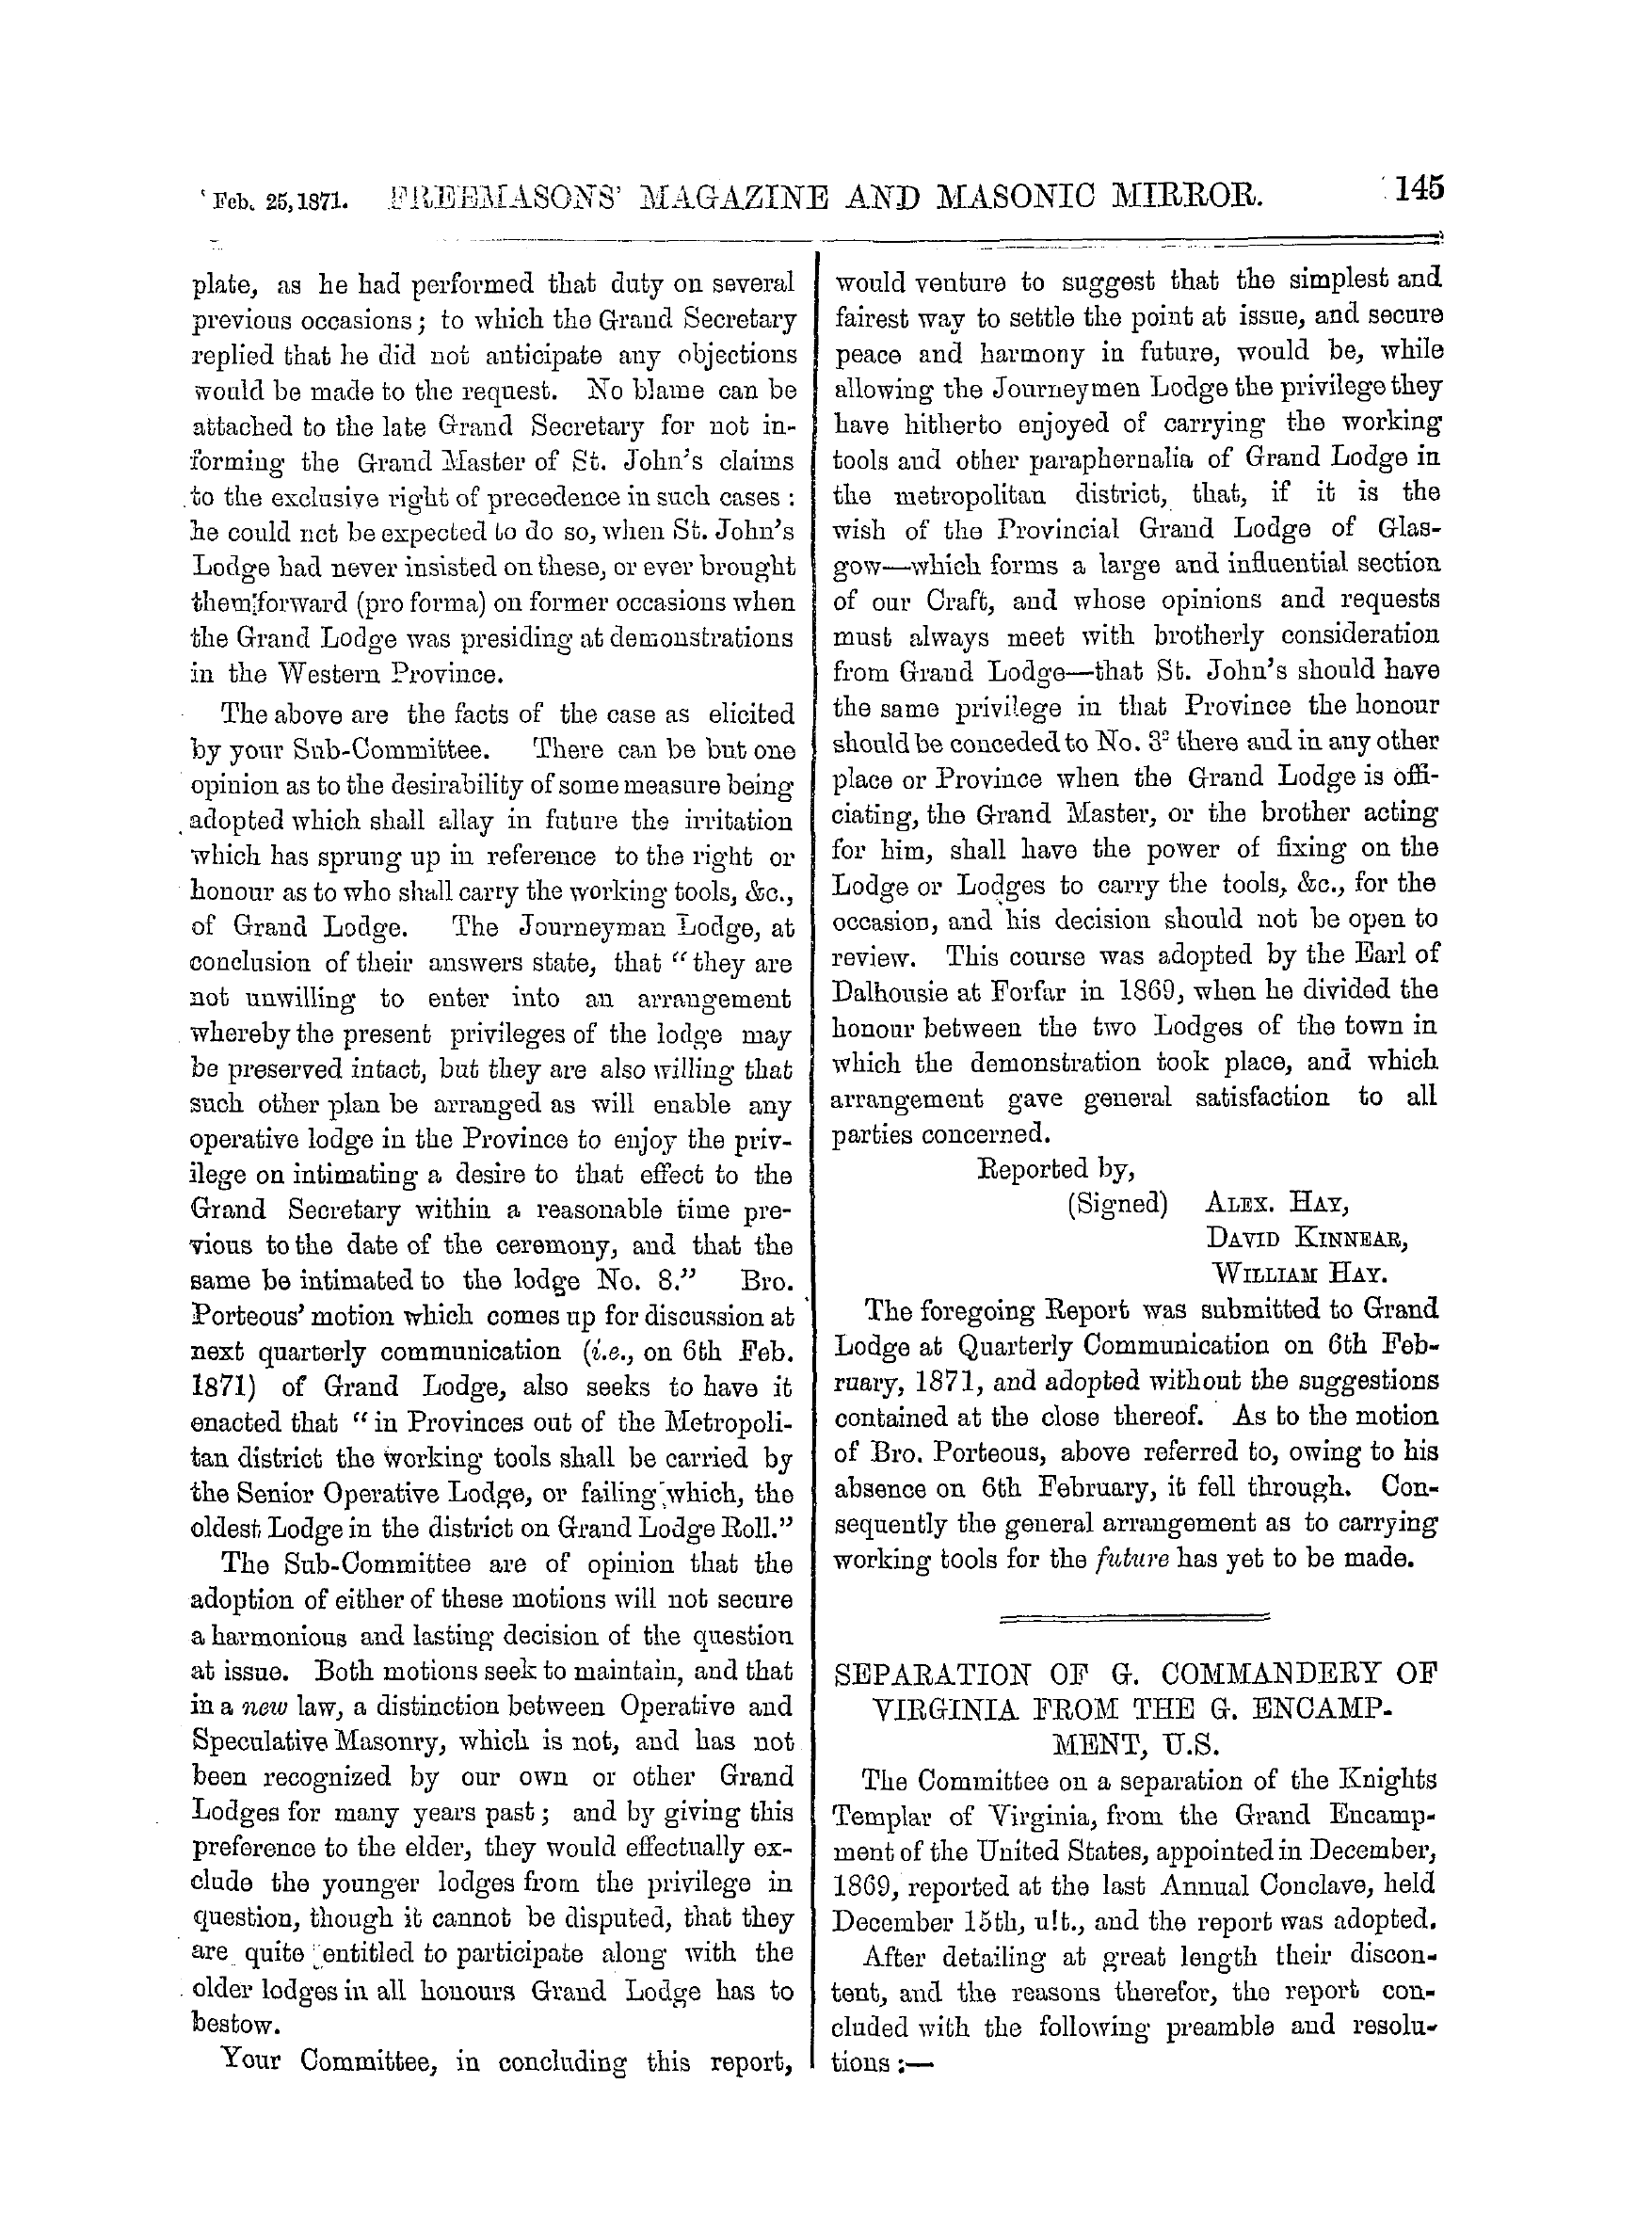 The Freemasons' Monthly Magazine: 1871-02-25 - Separation Of G. Commandery Of Virginia From The G. Encampment, U.S.